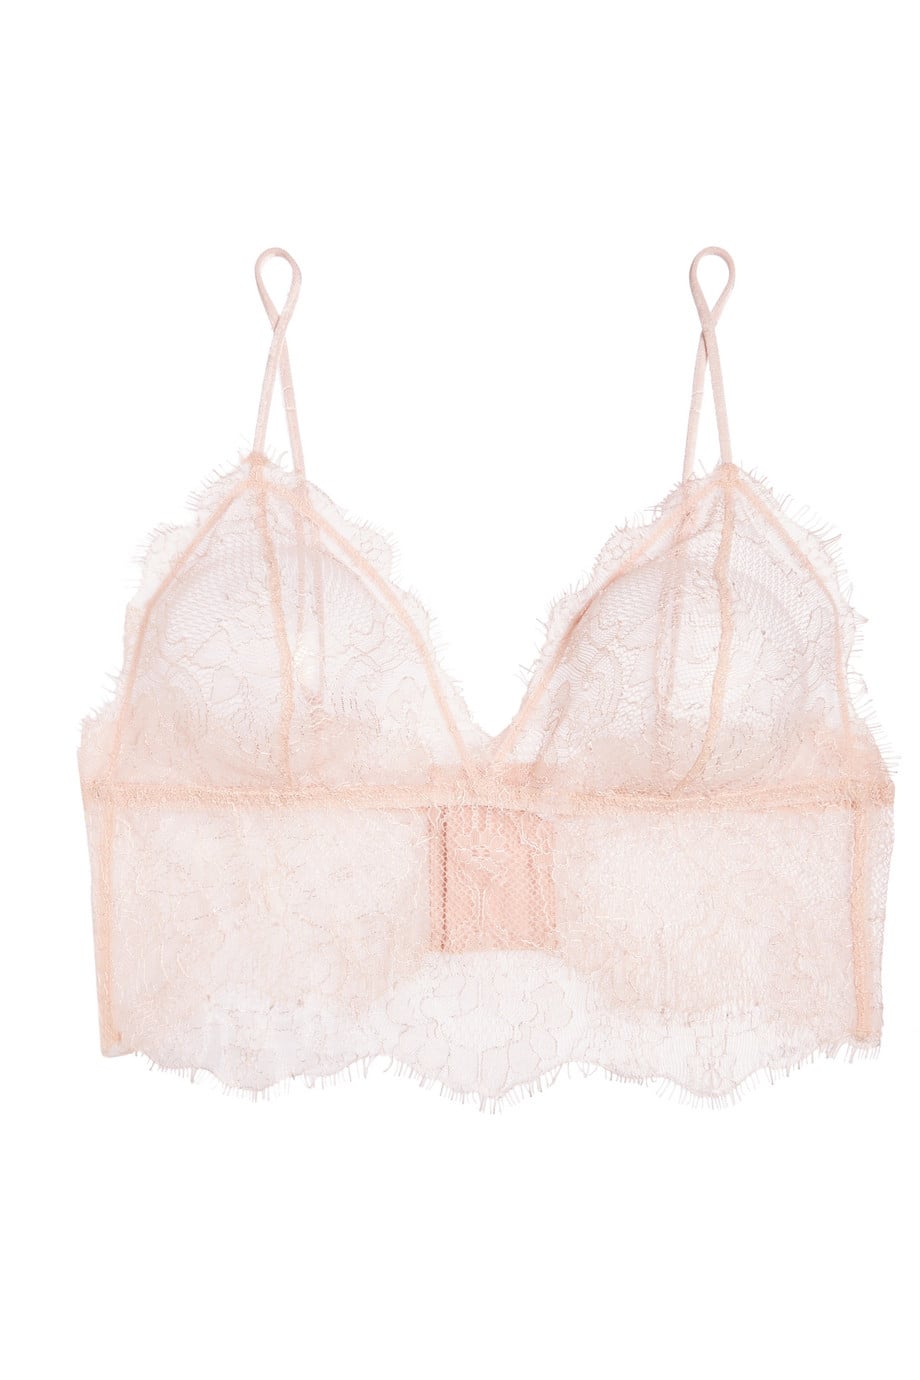 The sexy Valentine's Day outfit you need! This is the softest lace